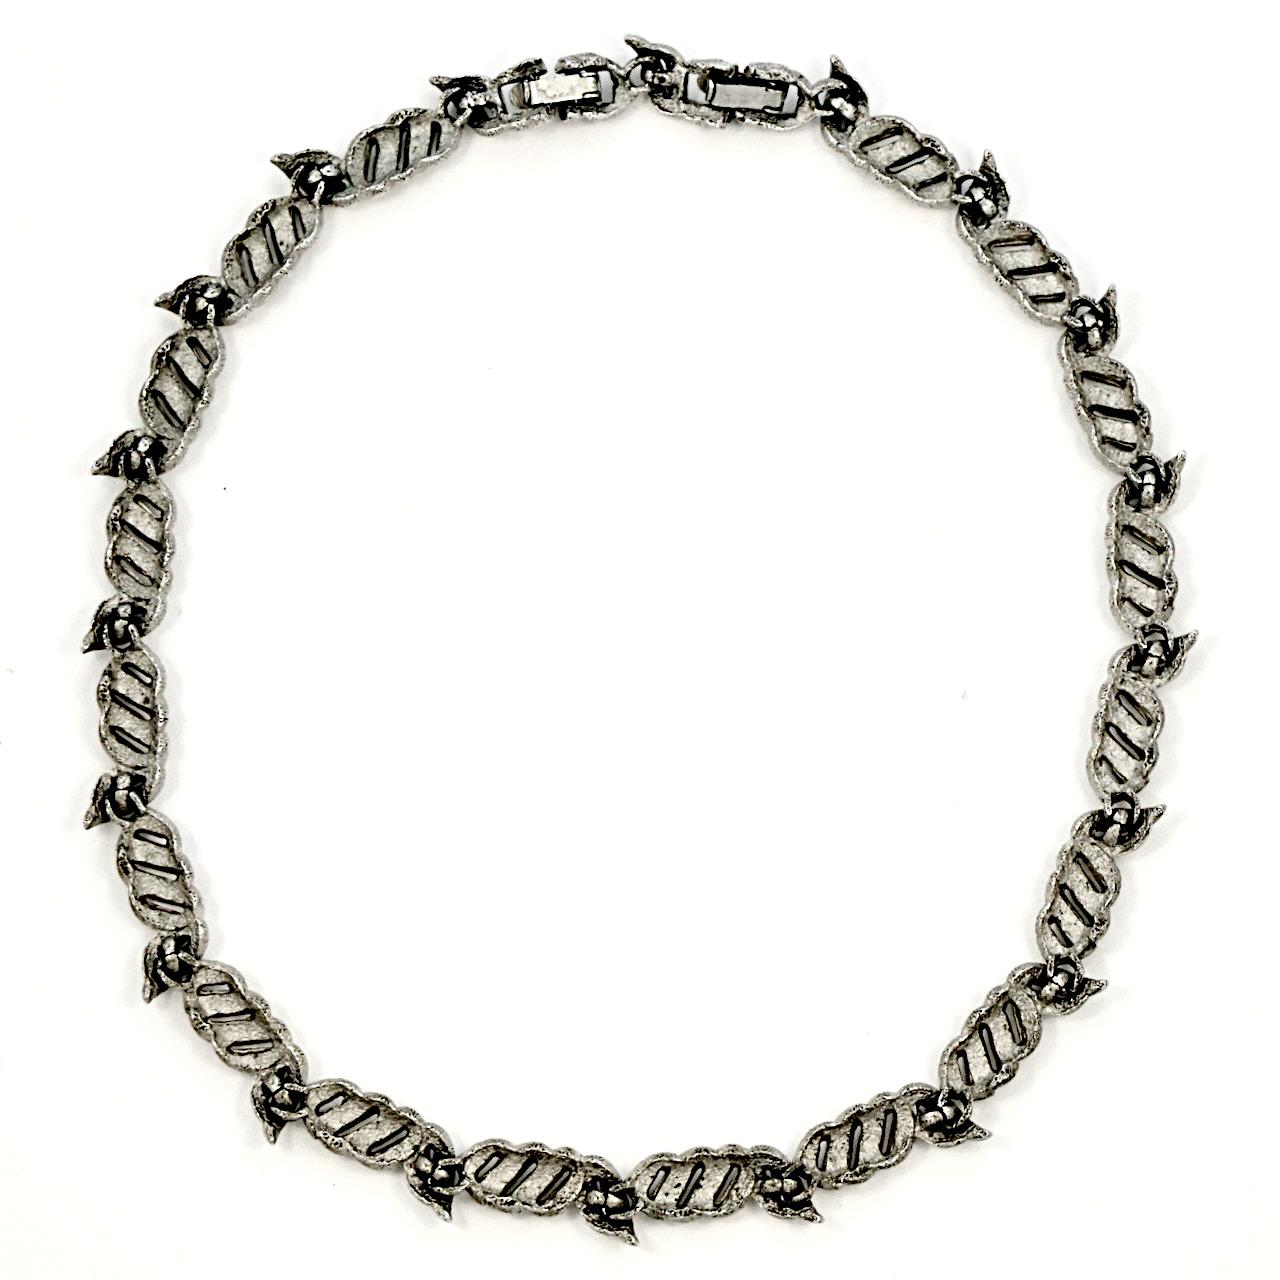 Trifari Silver Plated Brushed and Shiny Link Design Necklace circa 1960s For Sale 1